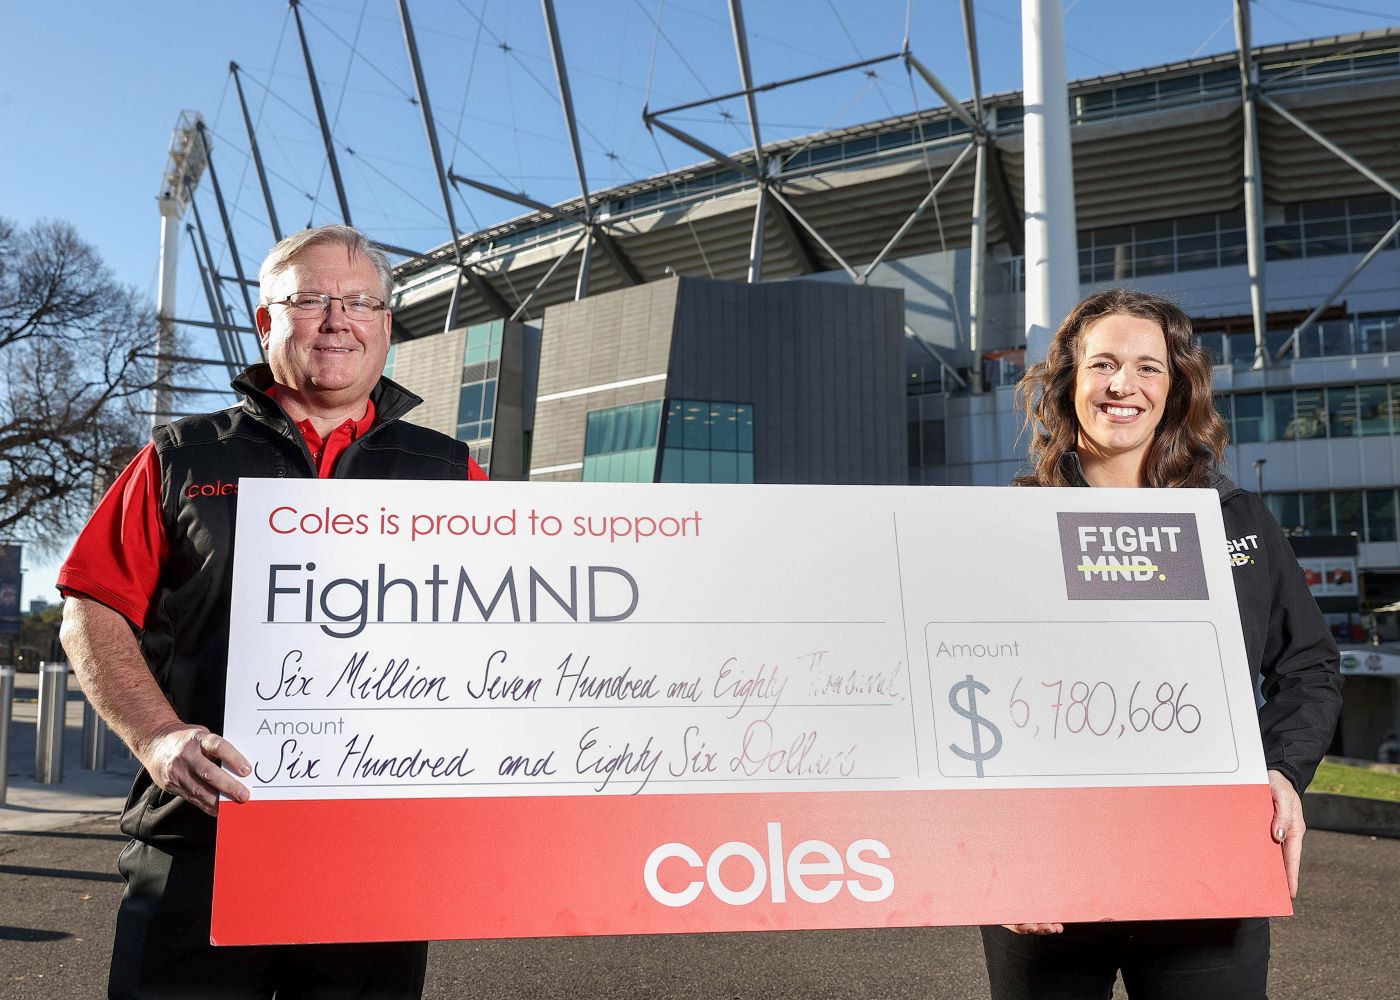 Coles Group CEO Steven Cain presents a cheque of $6.7m to FightMND Campaign Director Bec Daniher 